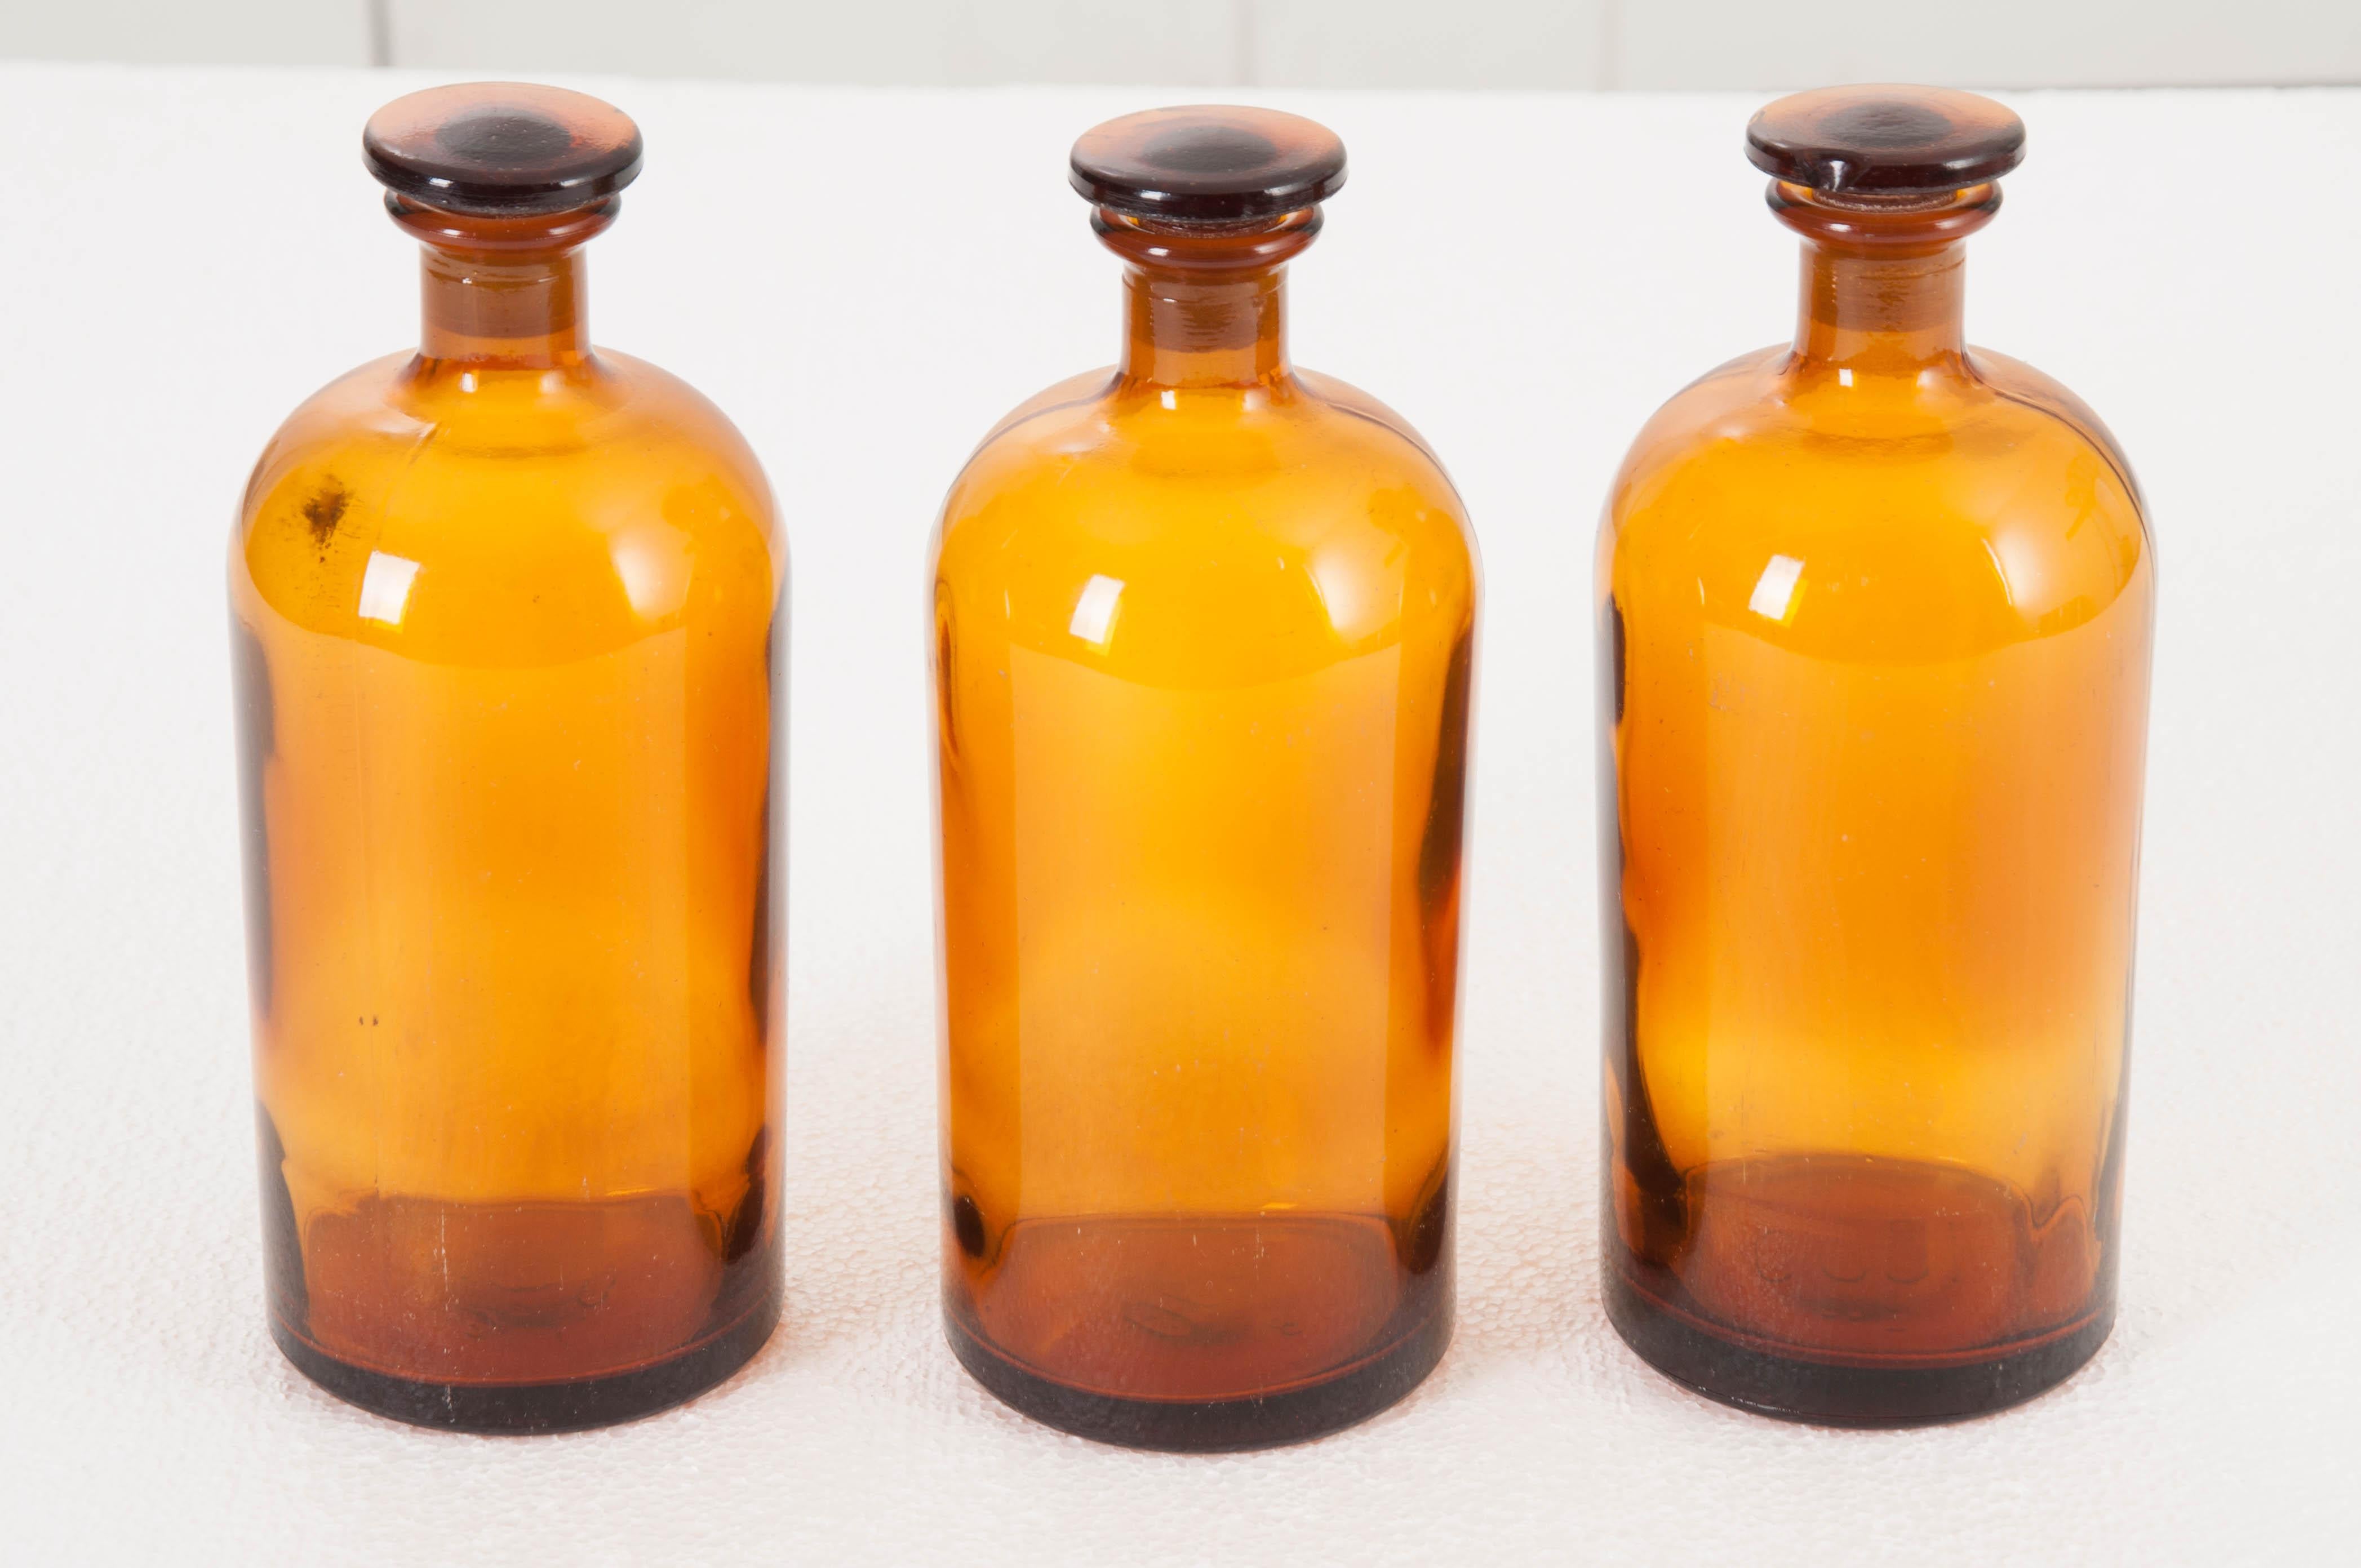 A fantastic set of vintage amber glass apothecary jars. These French jars were made towards the beginning of the 20th century. They each have lids that will protect their contents from dust and/or evaporation. The jars are available for individual